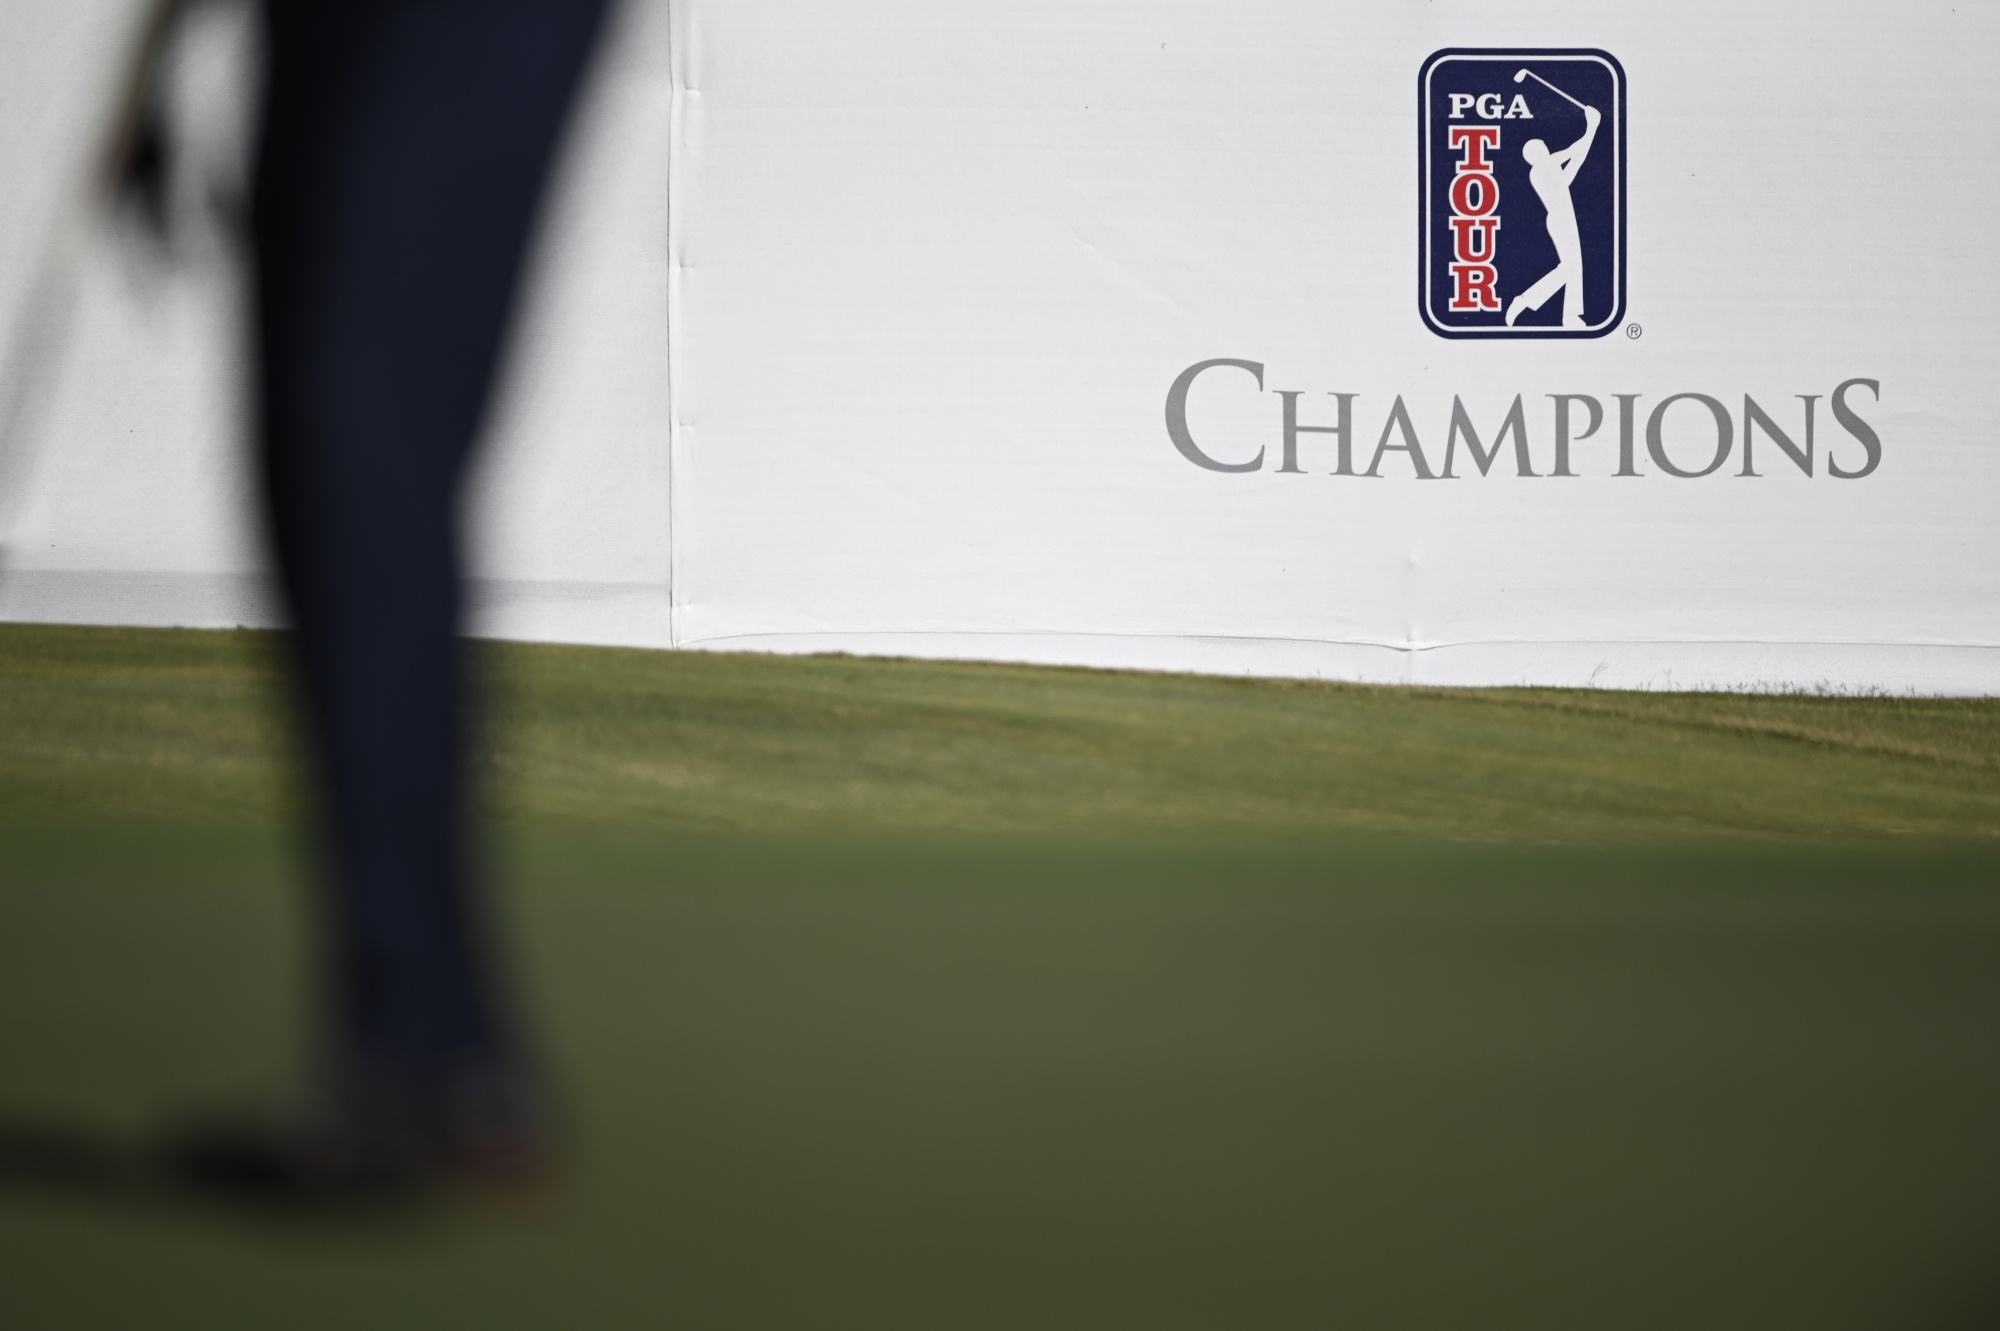 PGA Tour supports altering green-reading books in 2022